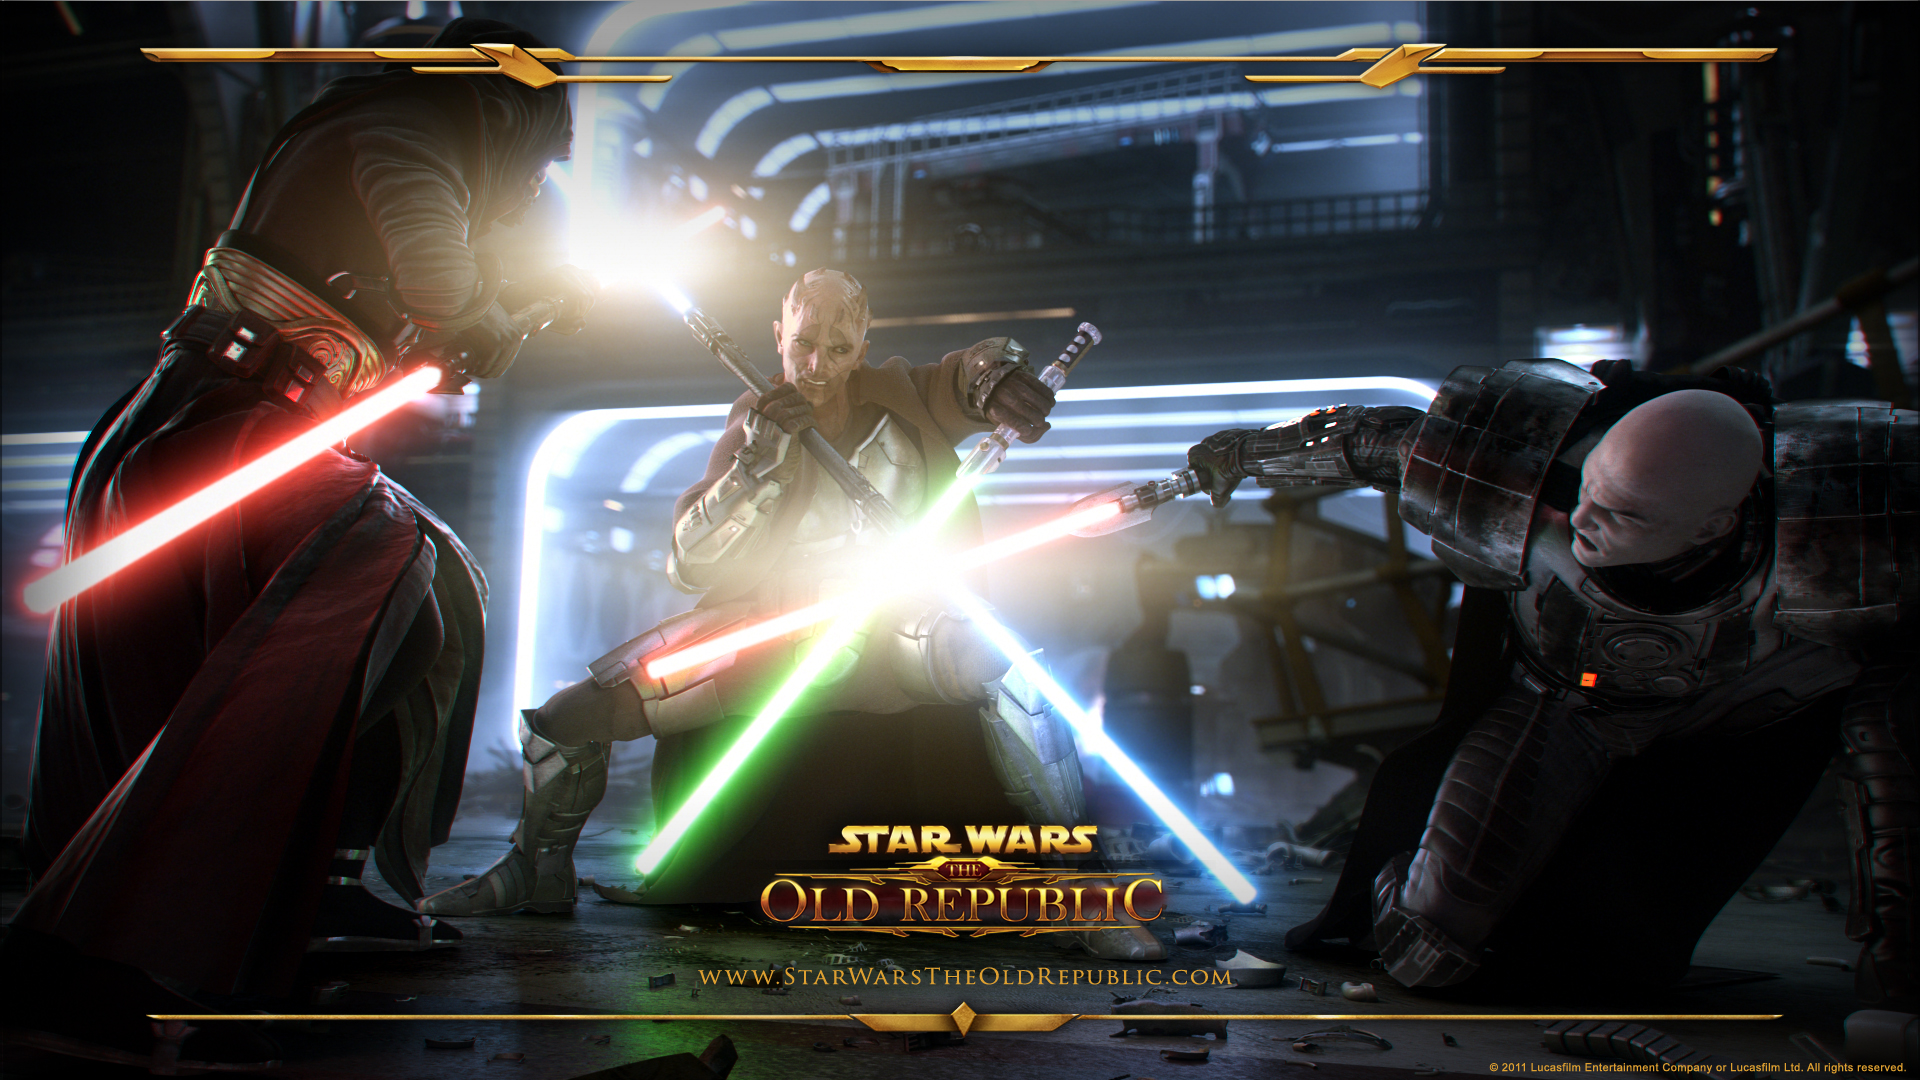 Star Wars: The Old Republic - Wallpaper Gallery